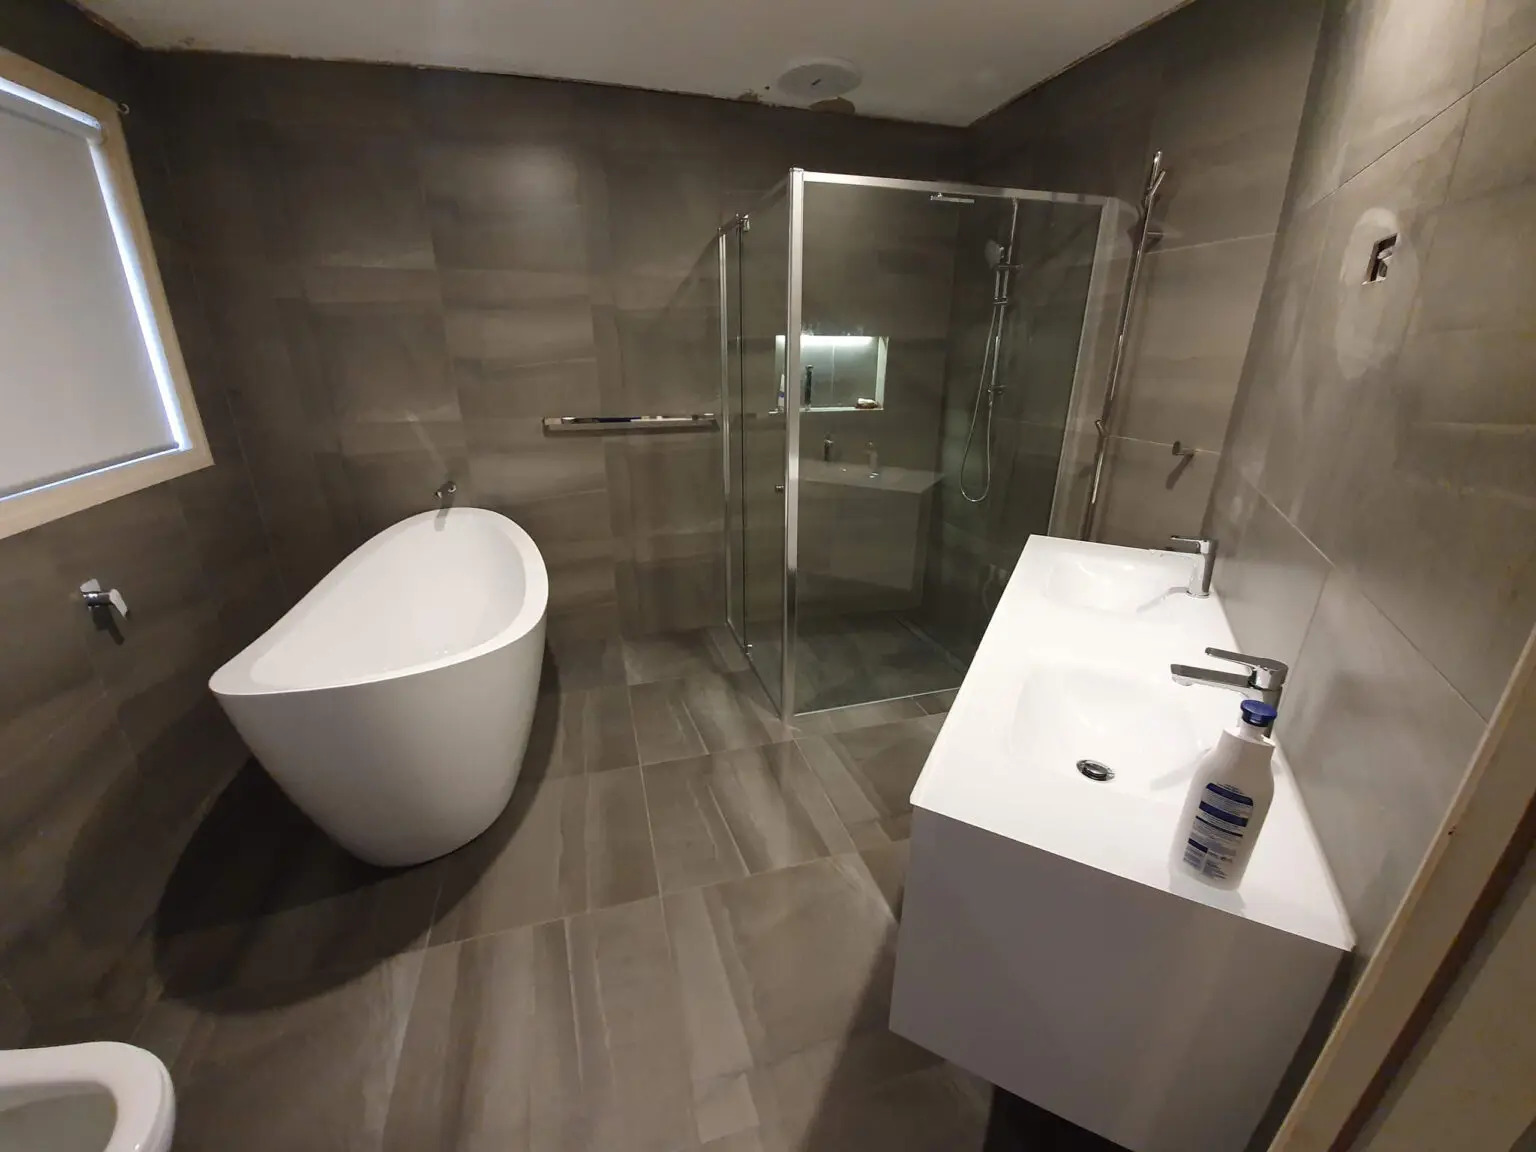 How Porcelain Tile Is Best For Small Bathroom Renovations? - WriteUpCafe.com